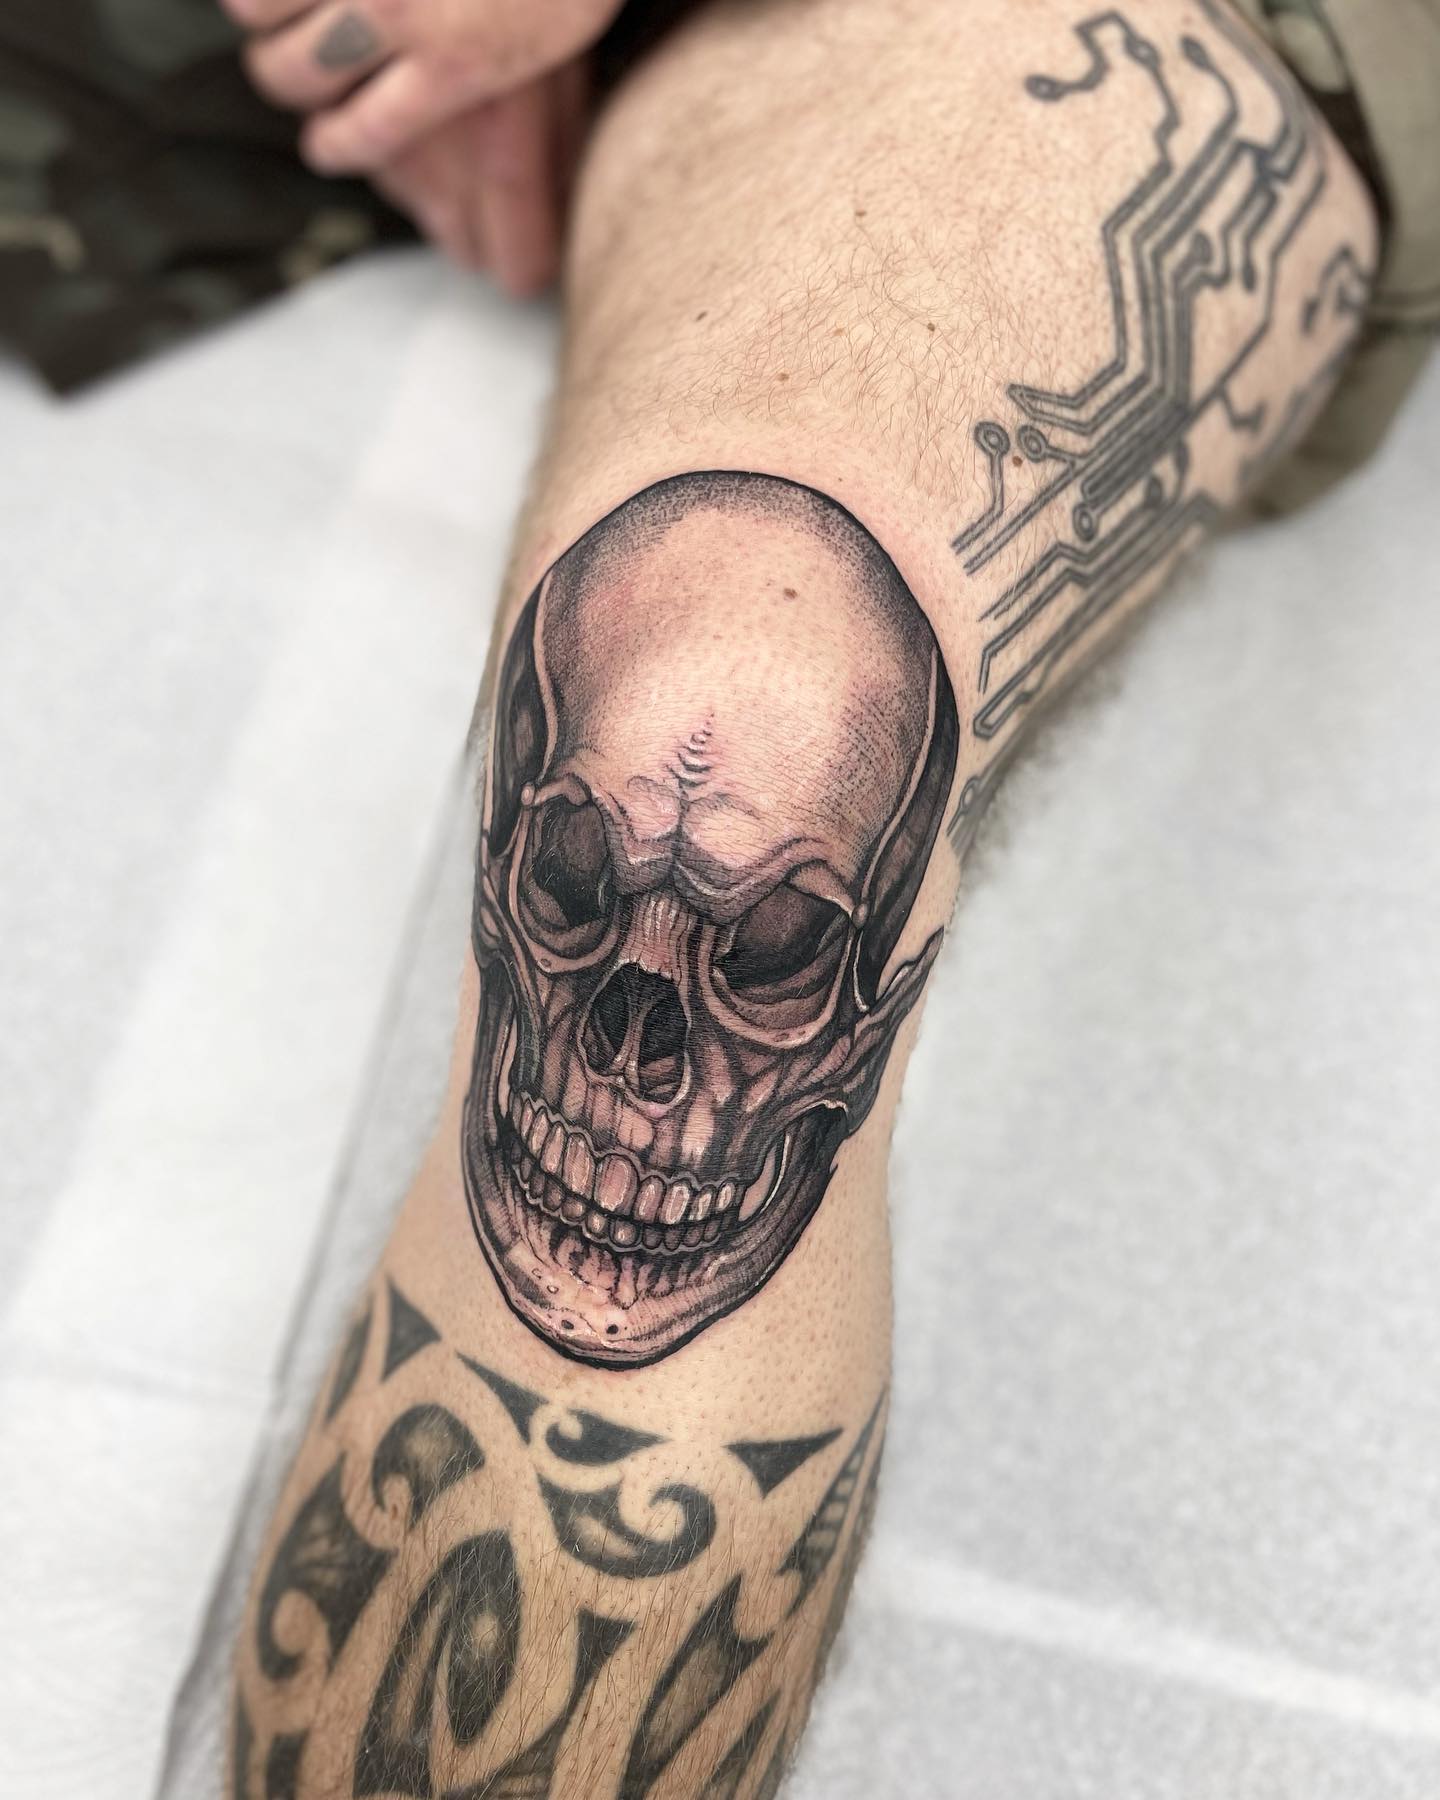 A skull tattoo such as this one shows your fierce side. It can also show that you’ve been close to death but have managed to pull through in your own way. Skulls are also used to describe your path, the natural journey of life, as well as everything that surrounds you, yet you don’t fear it.